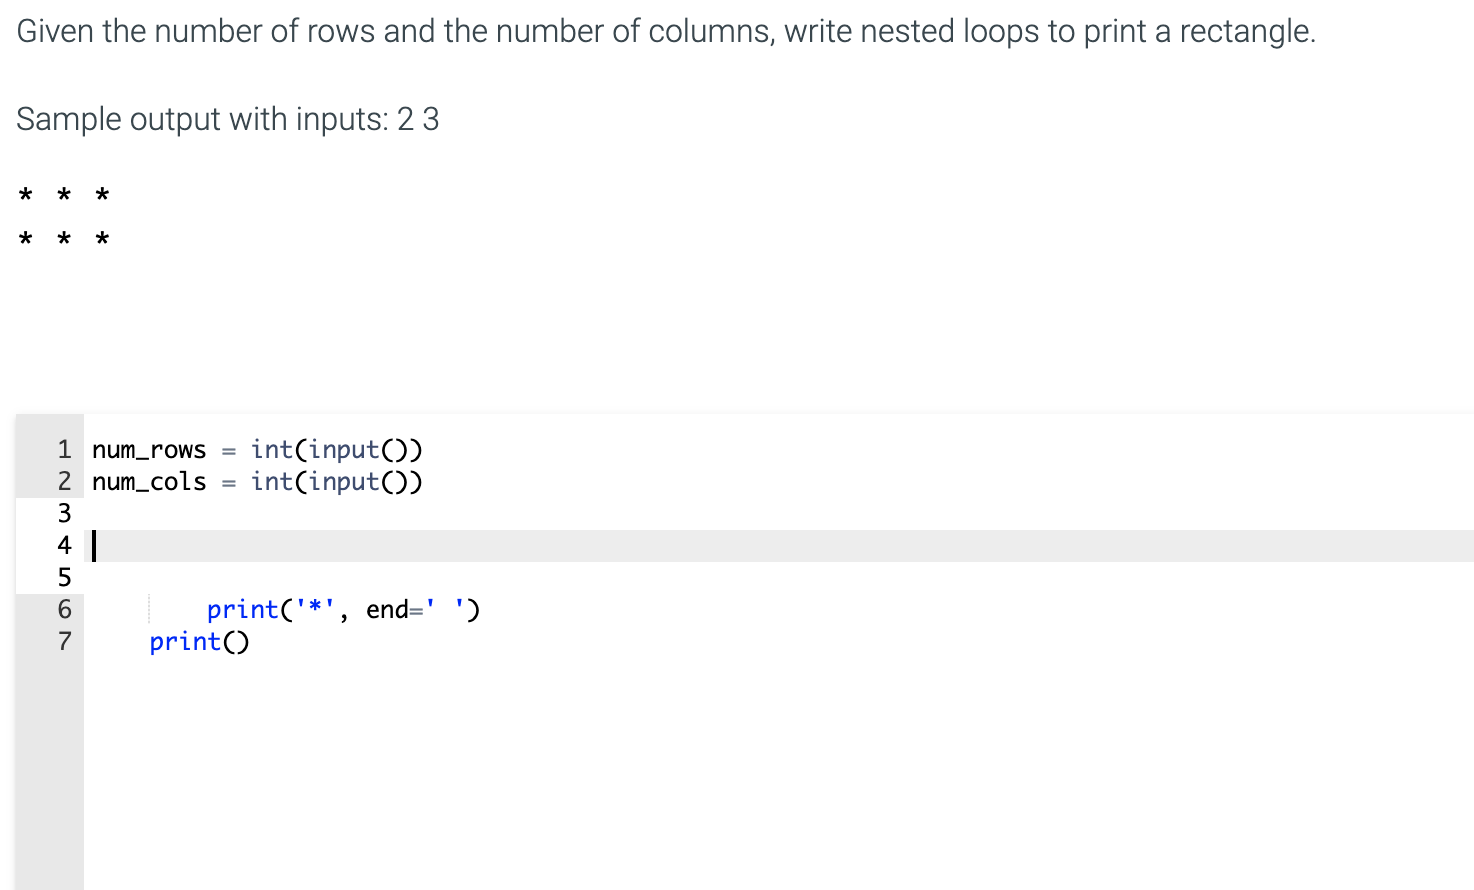 Given the number of rows and the number of columns, write nested loops to print a rectangle.
Sample output with inputs: 2 3
int(input())
int(input())
1 num_roWS =
2 num_cols
3
4
5
print('*', end=' ')
print()
